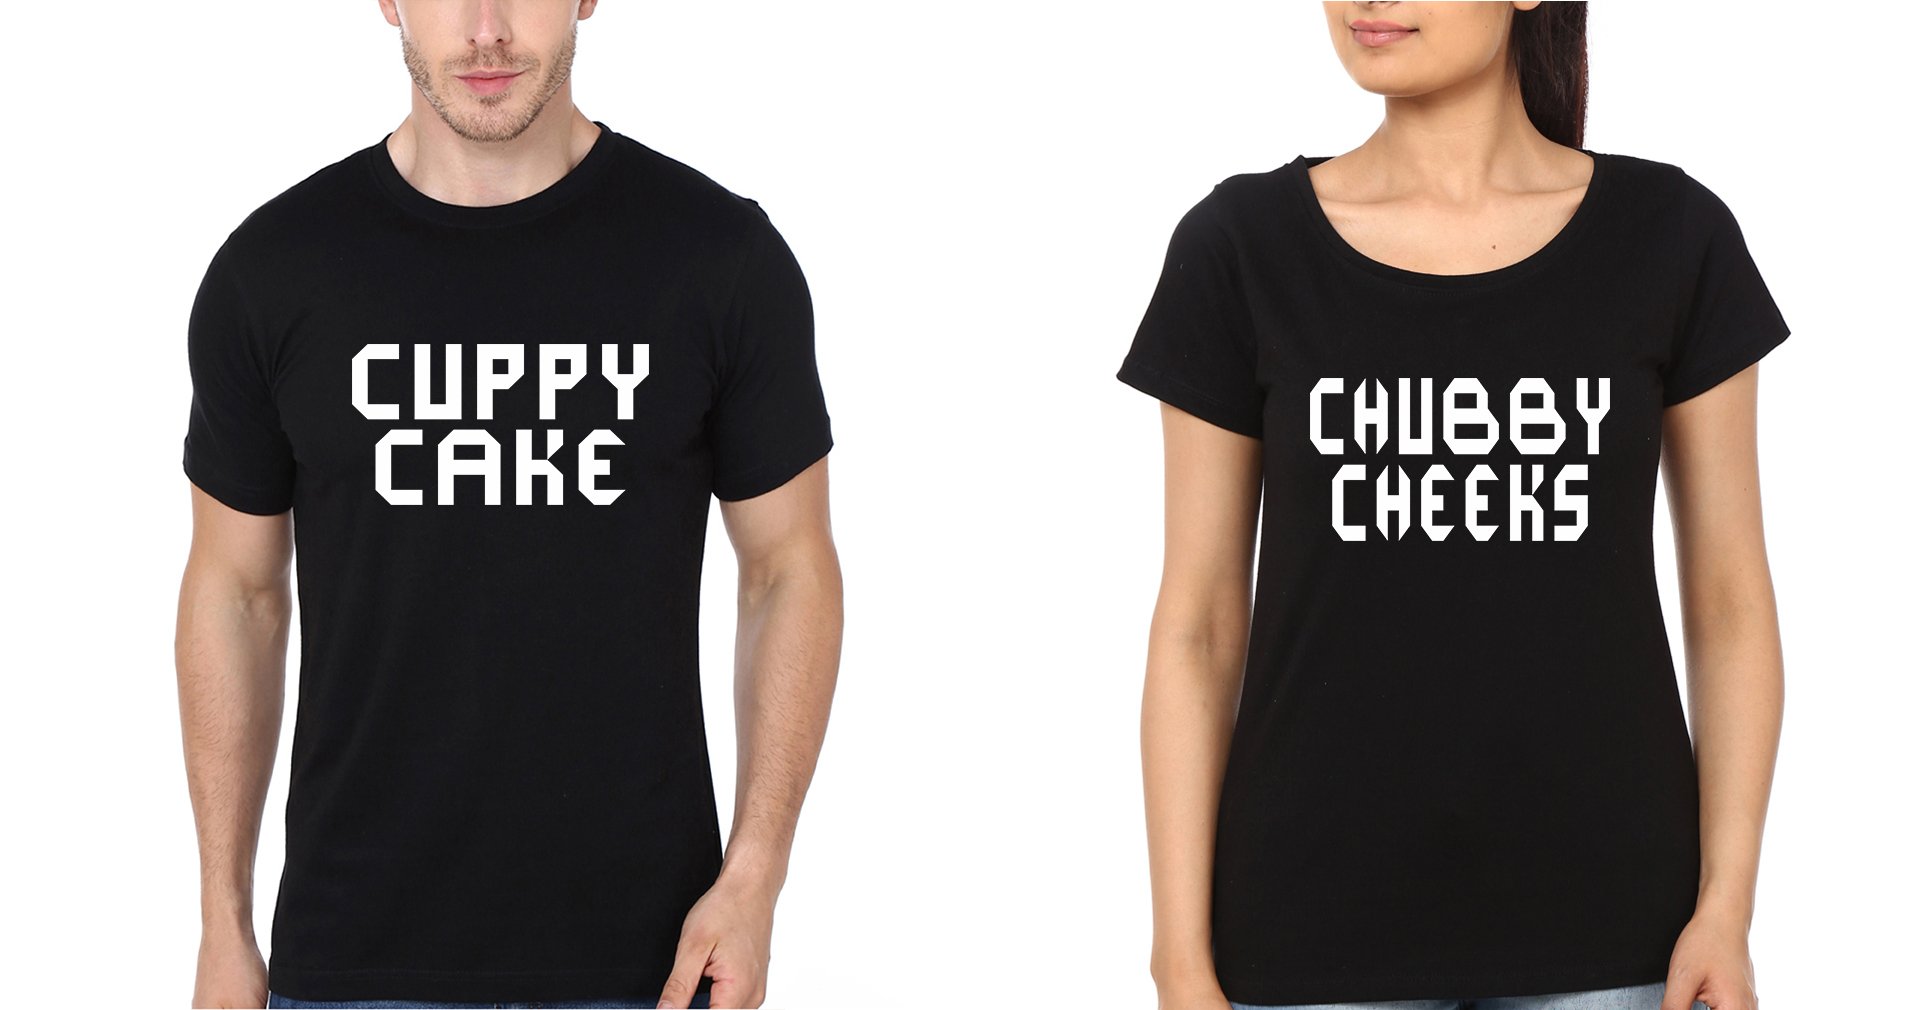 Cuppy Cake & Chubby Chicks Couple Half Sleeves T-Shirts -FunkyTees